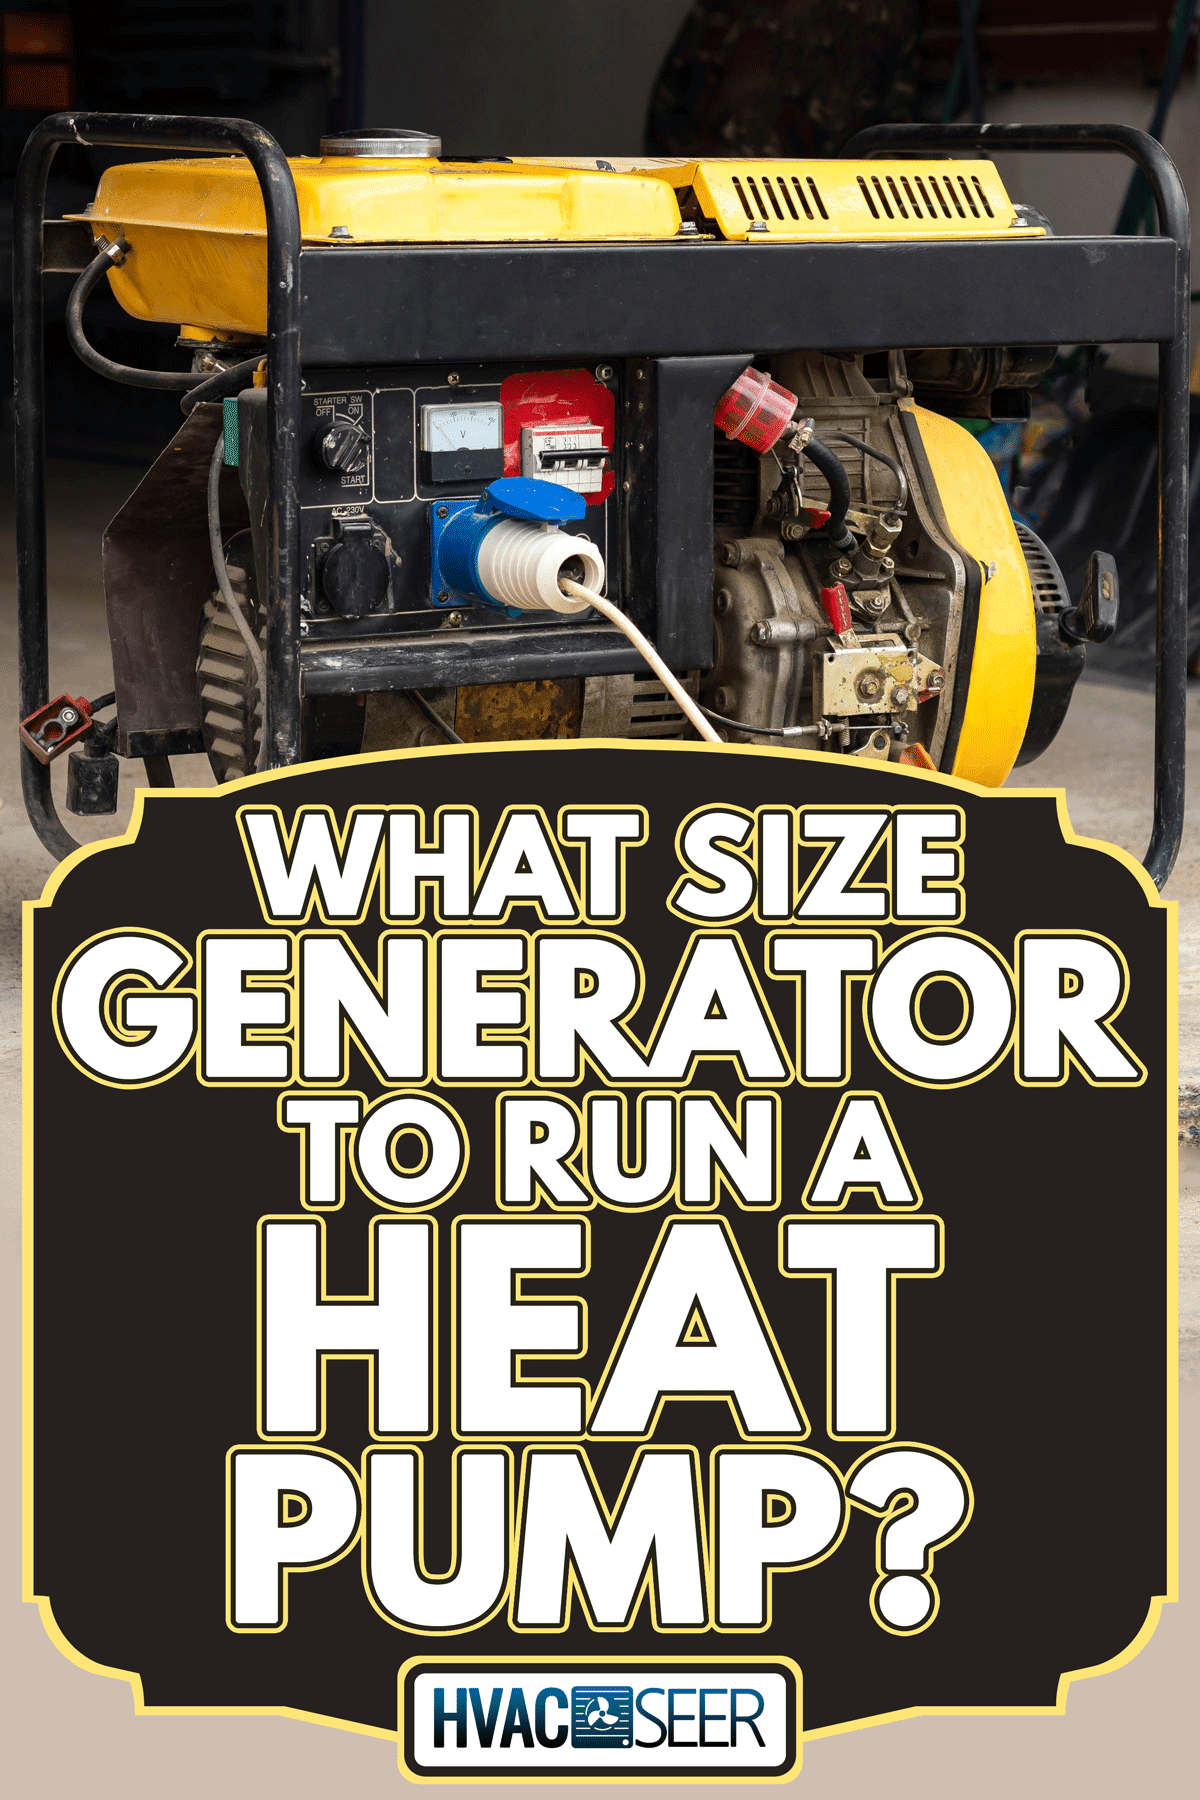 Stand-alone diesel generator to supply electricity in an emergency, What Size Generator To Run A Heat Pump?